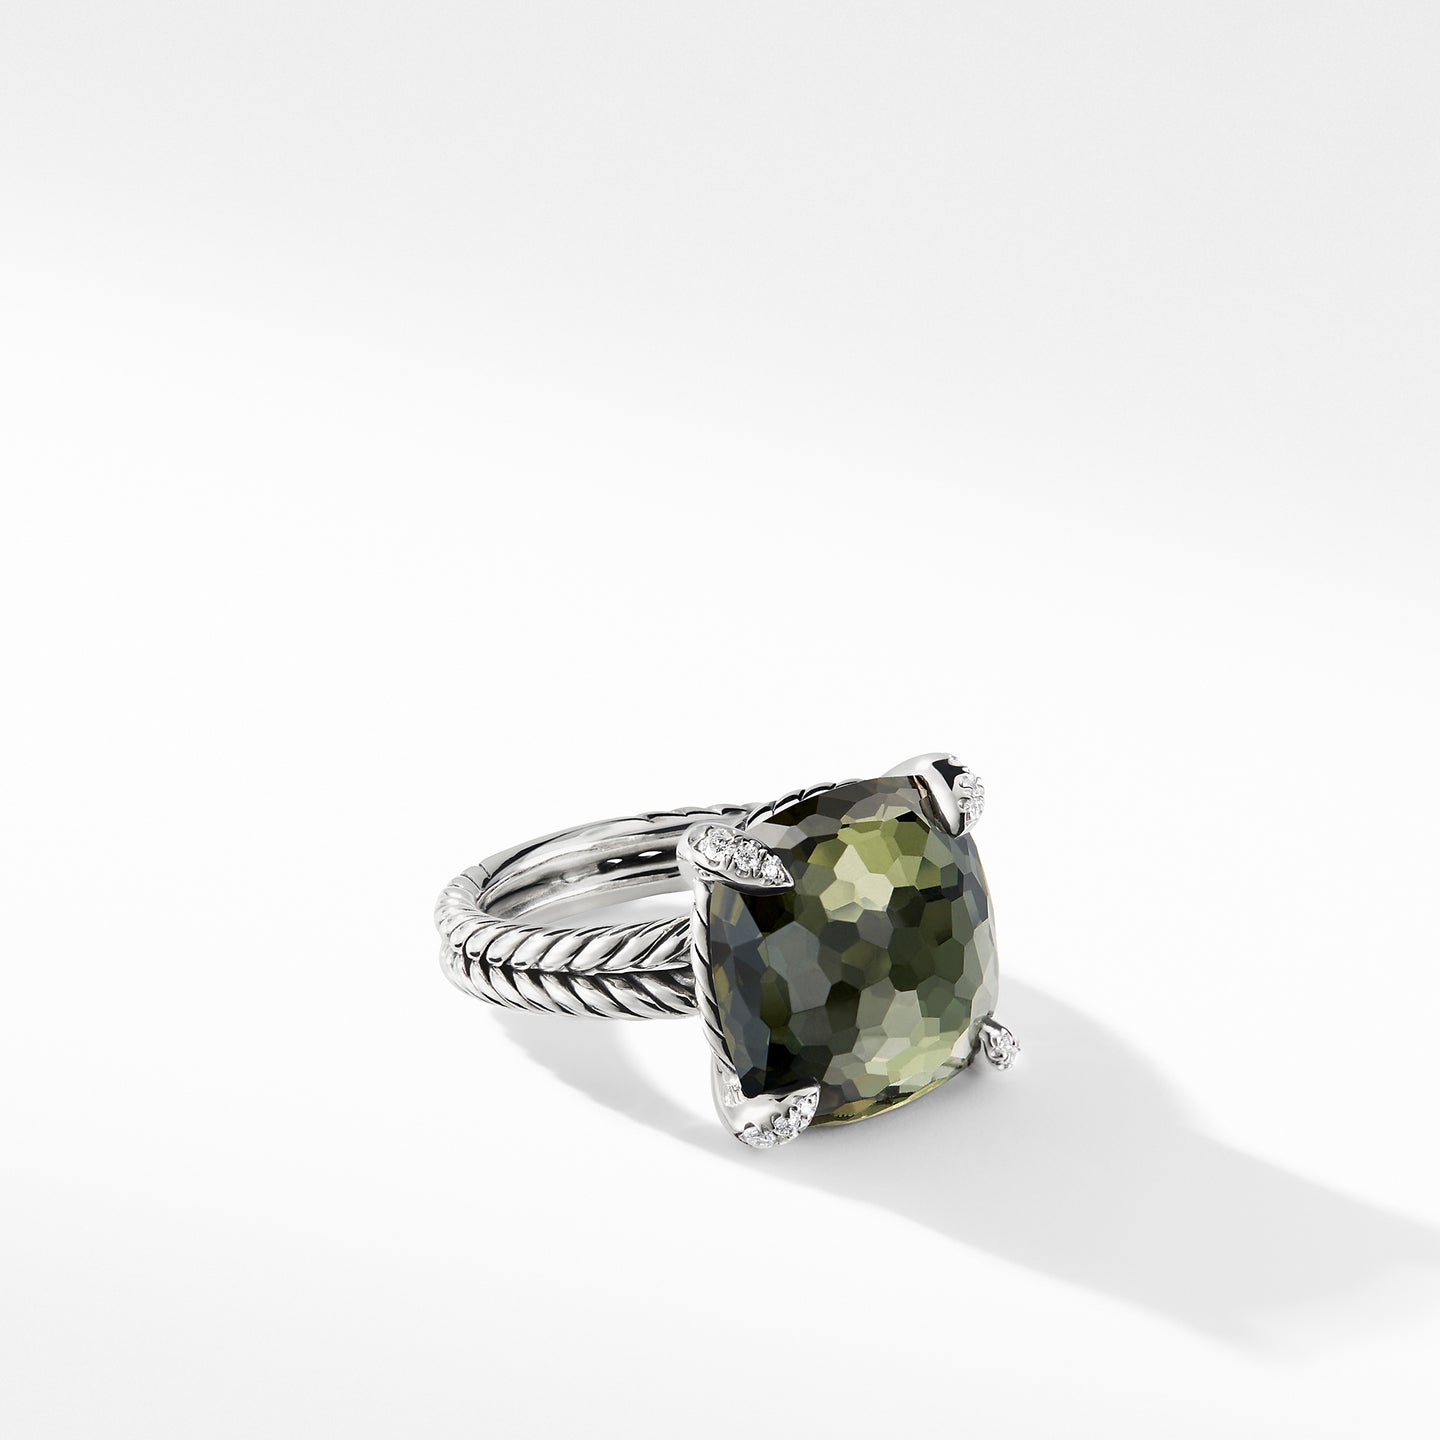 Ring with Green Orchid and Diamonds, Size 7